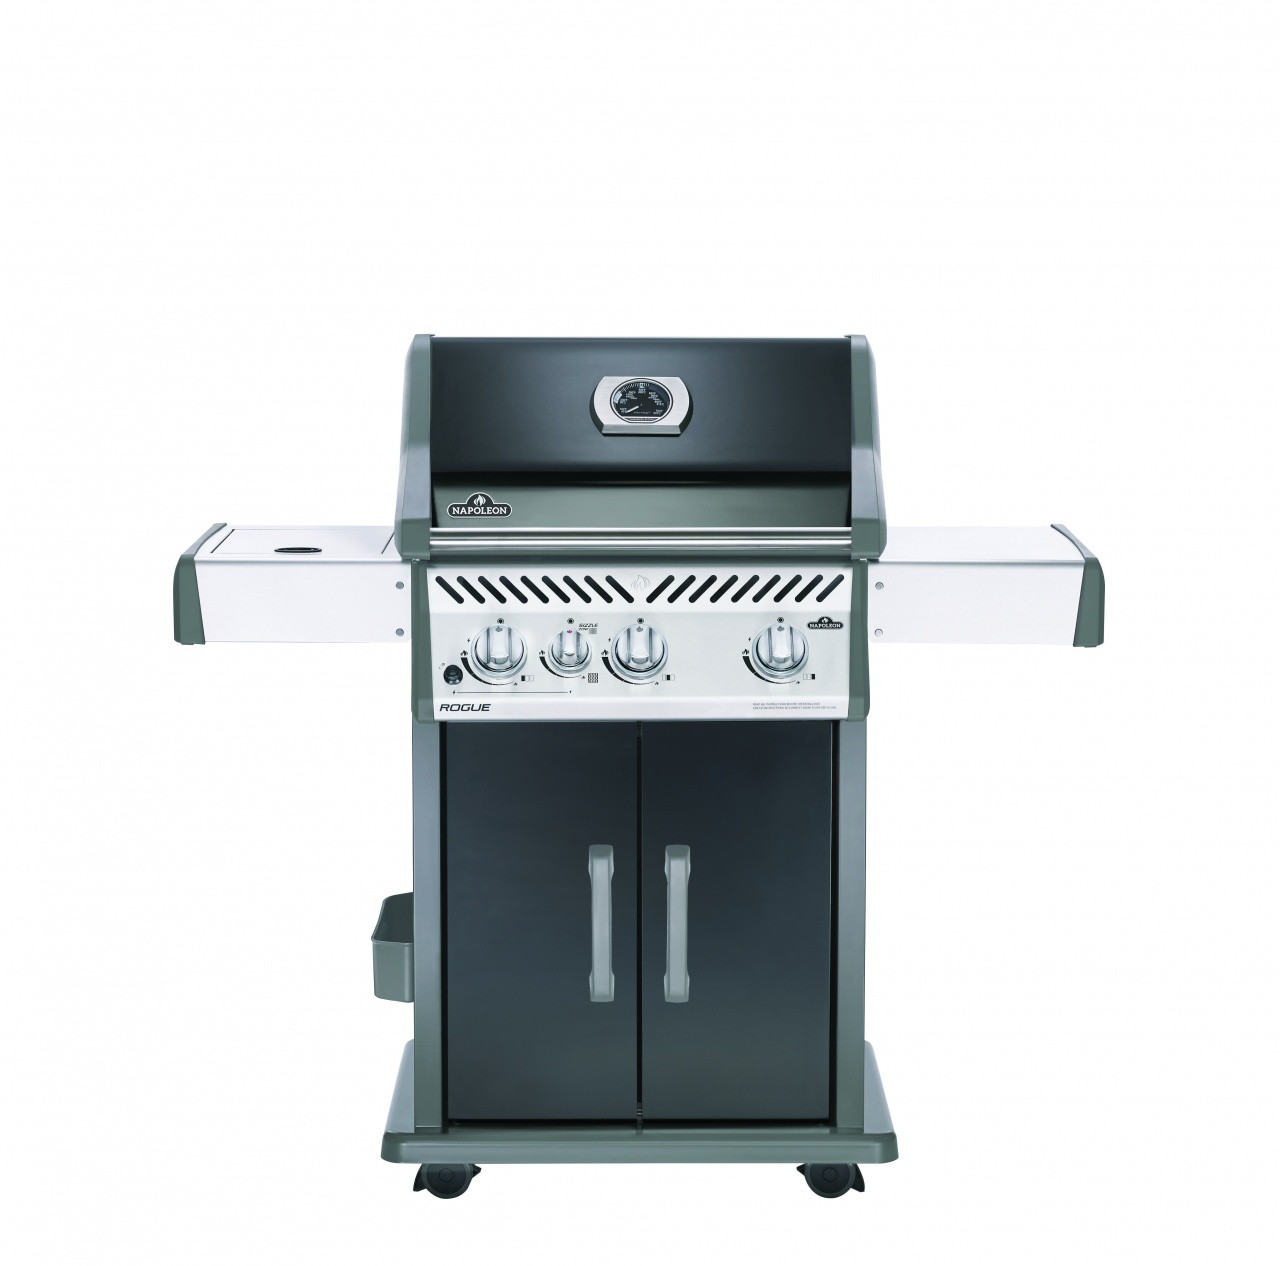 Outdoor Kitchen Appliances Packages
 Outdoor Kitchen Appliances Packages – Is the Festive Bake